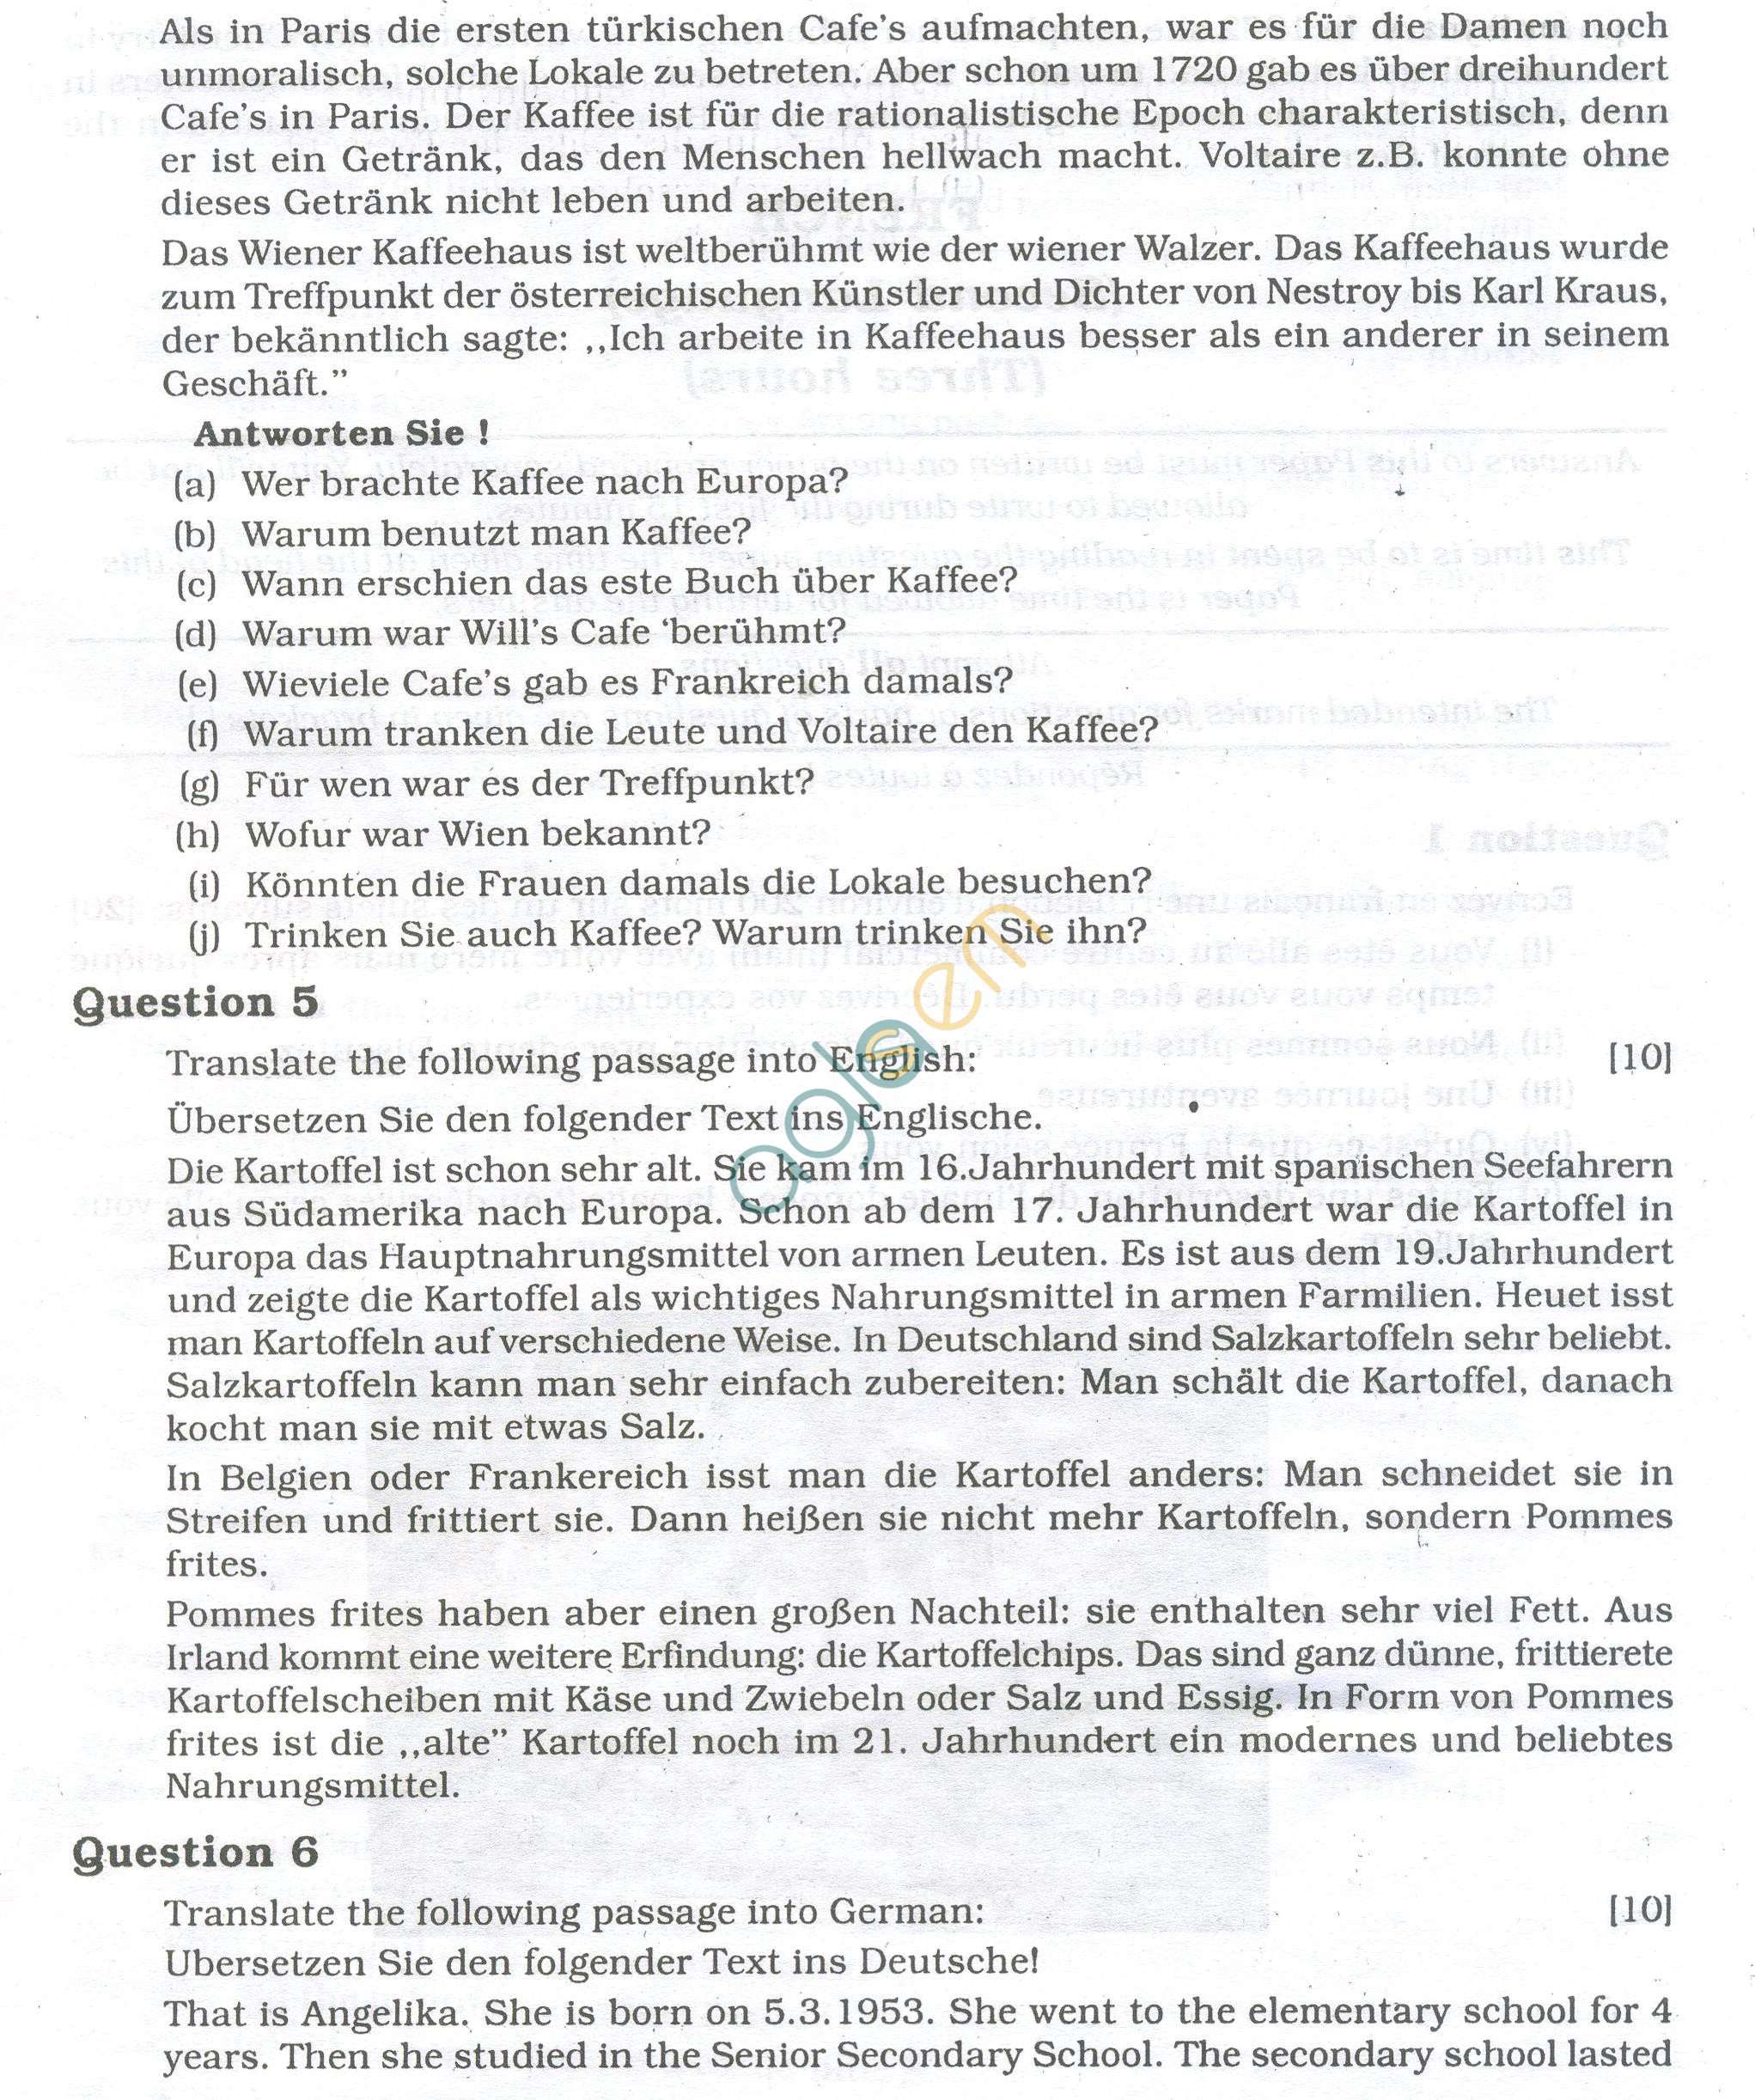 ICSE Question Papers 2013 for Class 10 - German/